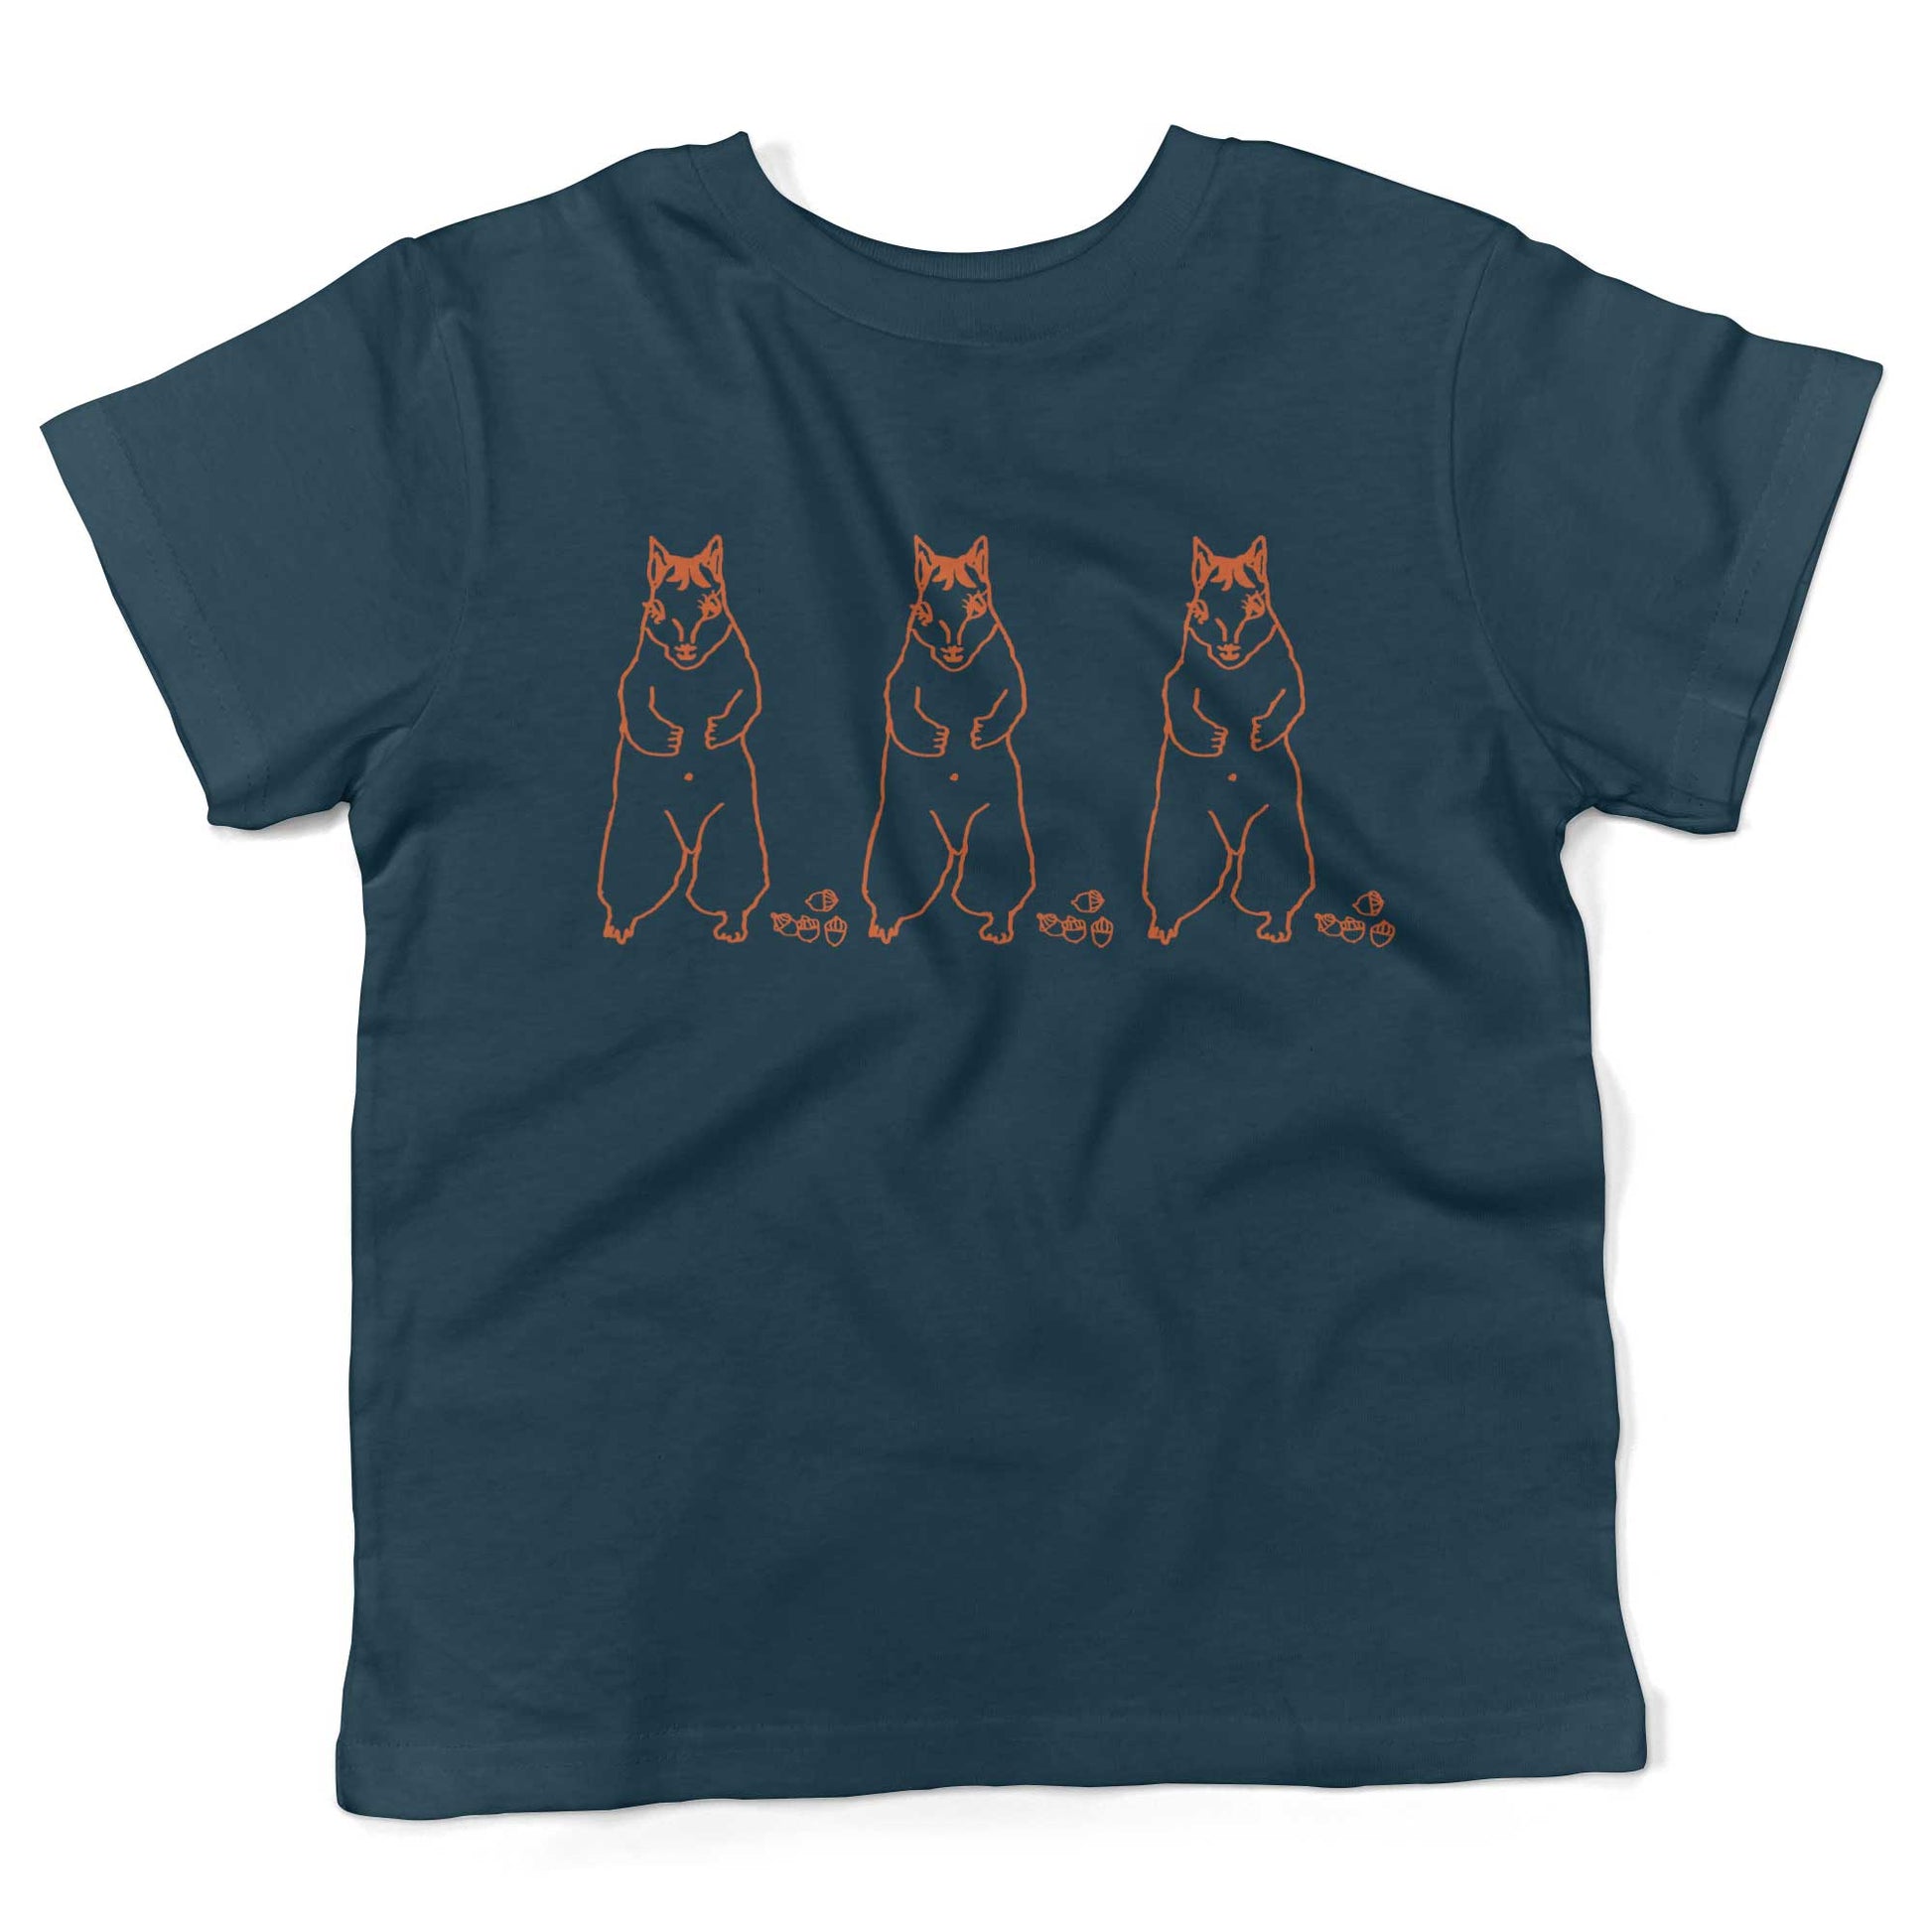 Cute Dancing Squirrels With Nuts Toddler Shirt-Organic Pacific Blue-2T